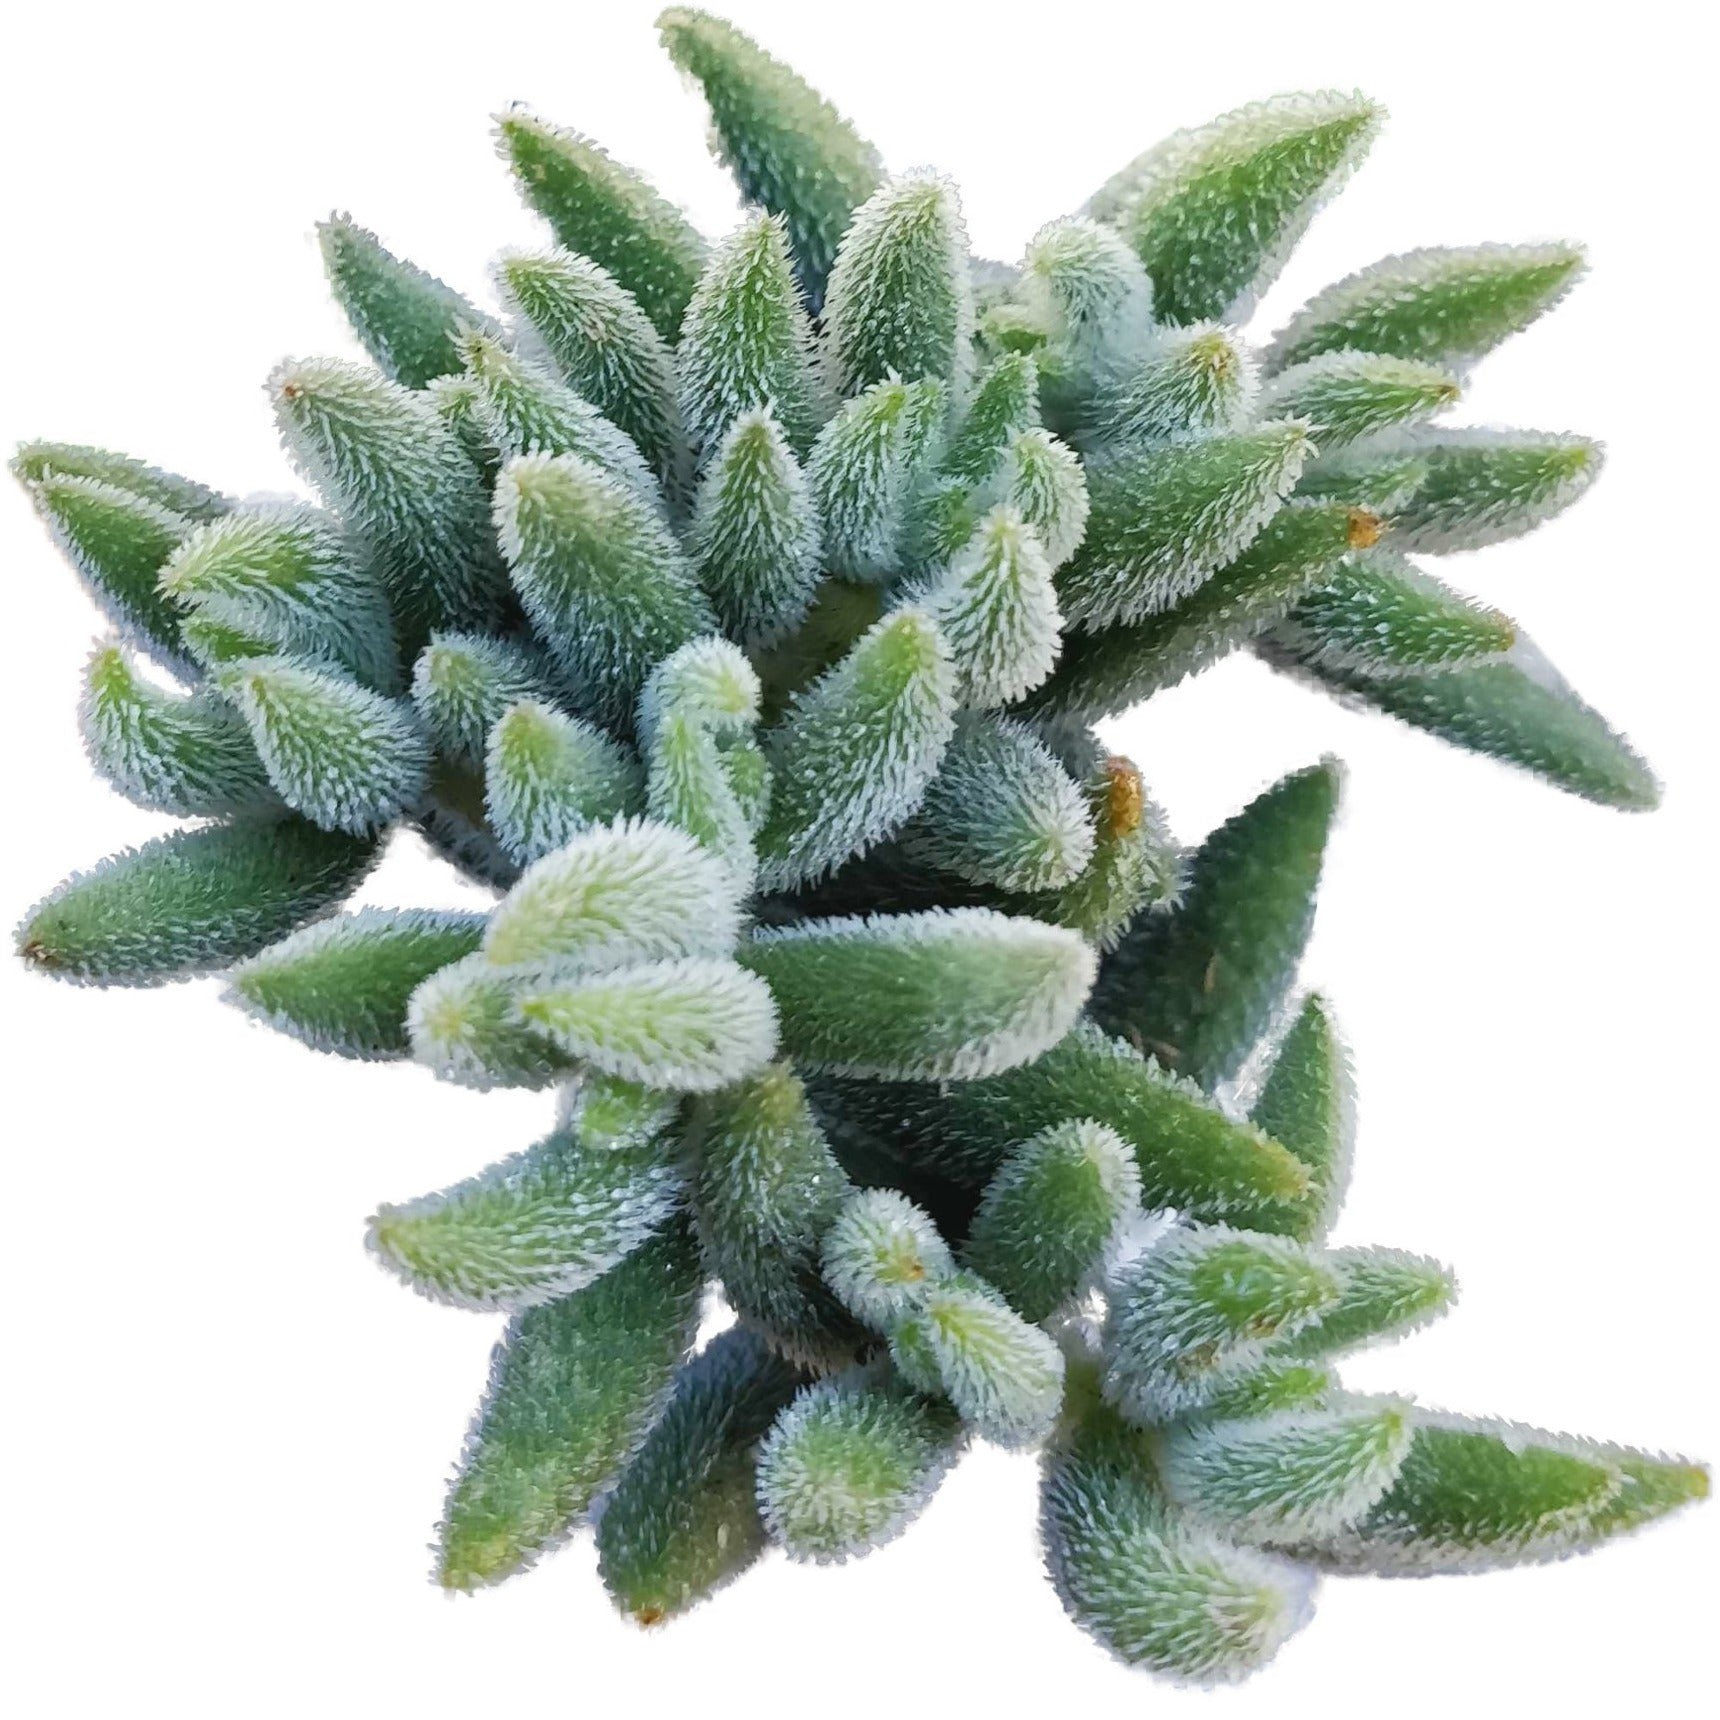 crassula mesembryanthemoides for sale, jade plant, succulent care tips, how to grow succulents, succulents store in CA, monthly succulents, succulent plant, succulent subscription, Succulents shop near me, cactus, crassula mesembryanthemoides in California, How to grow crassula mesembryanthemoides, crassula, crassula plant, crassula succulent, crassula types, crassula varieties, types of crassula, crassula species, crassulas, succulent crassula